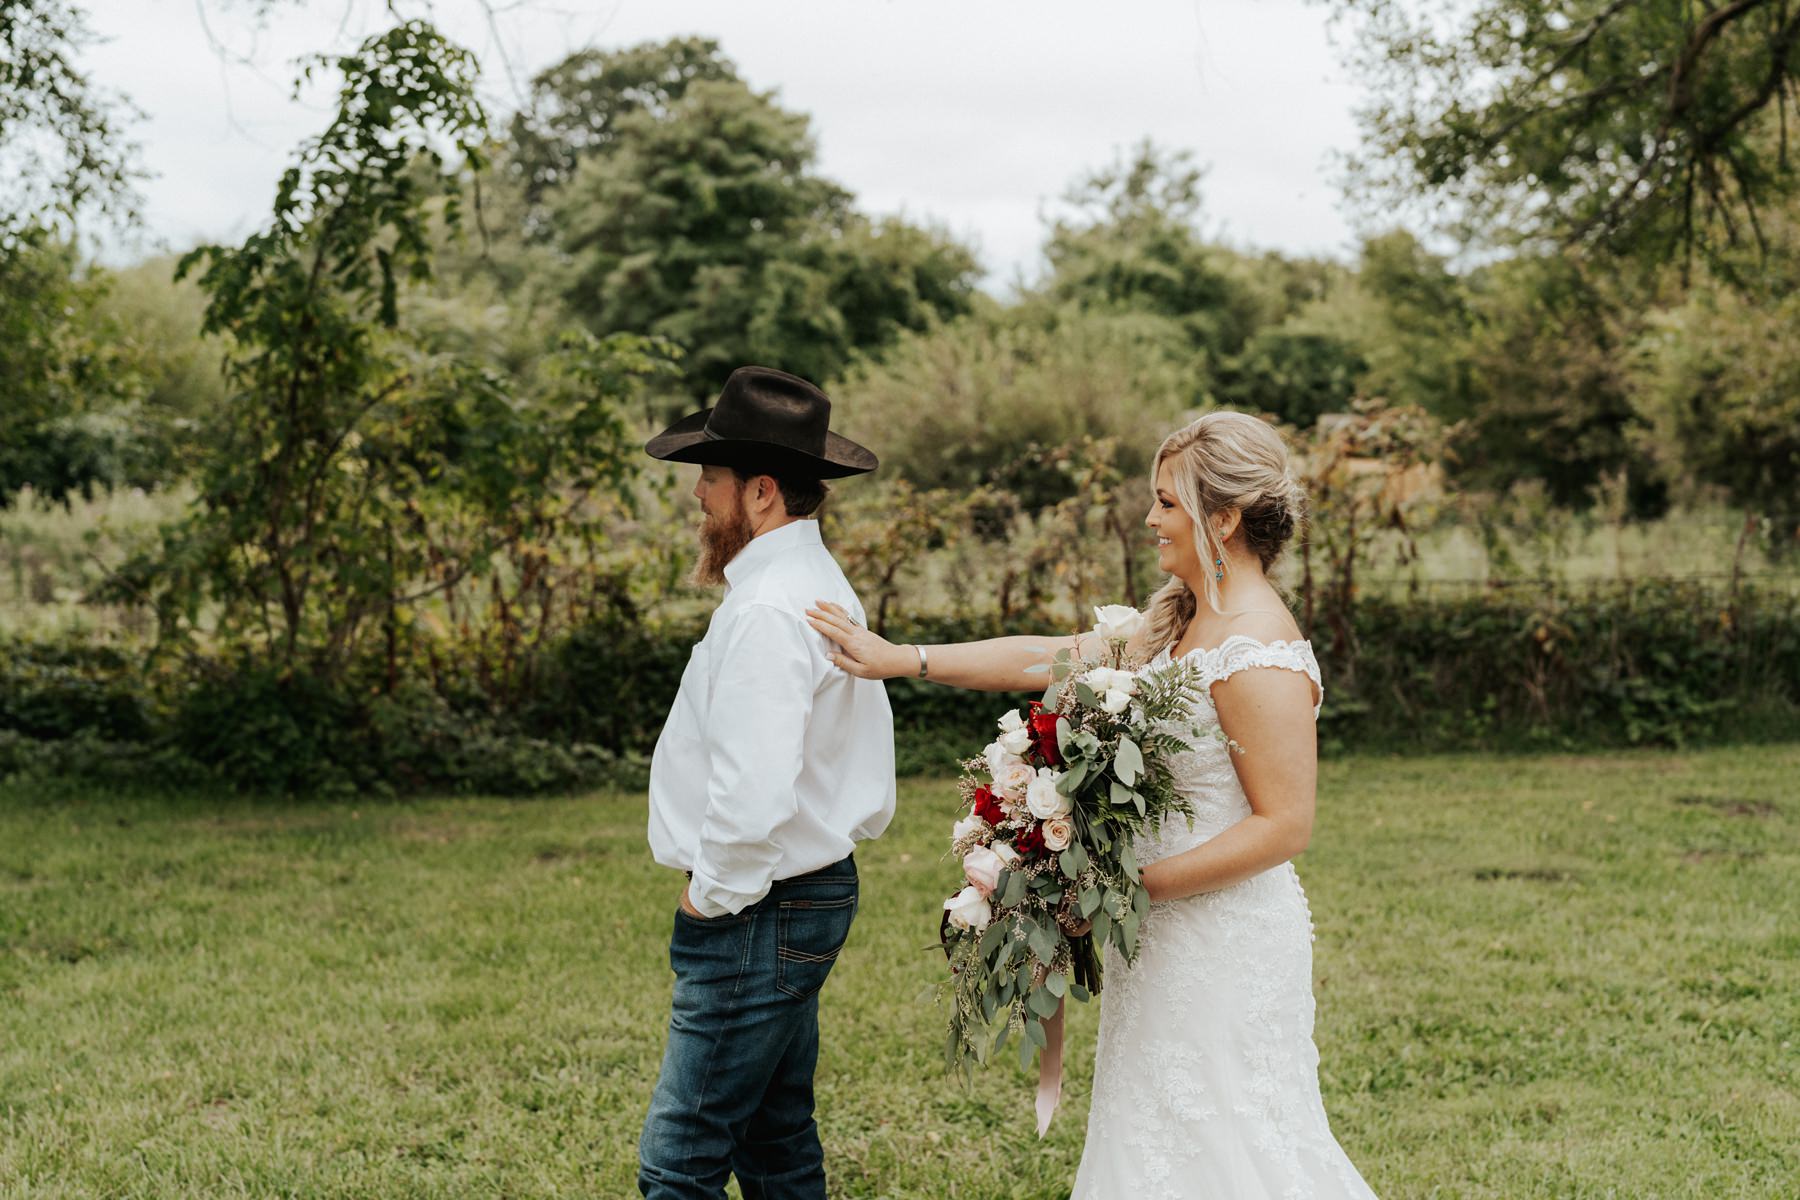 A bride and grooms first look at their wedding at The Barn at Belamour in Springfield, MO.